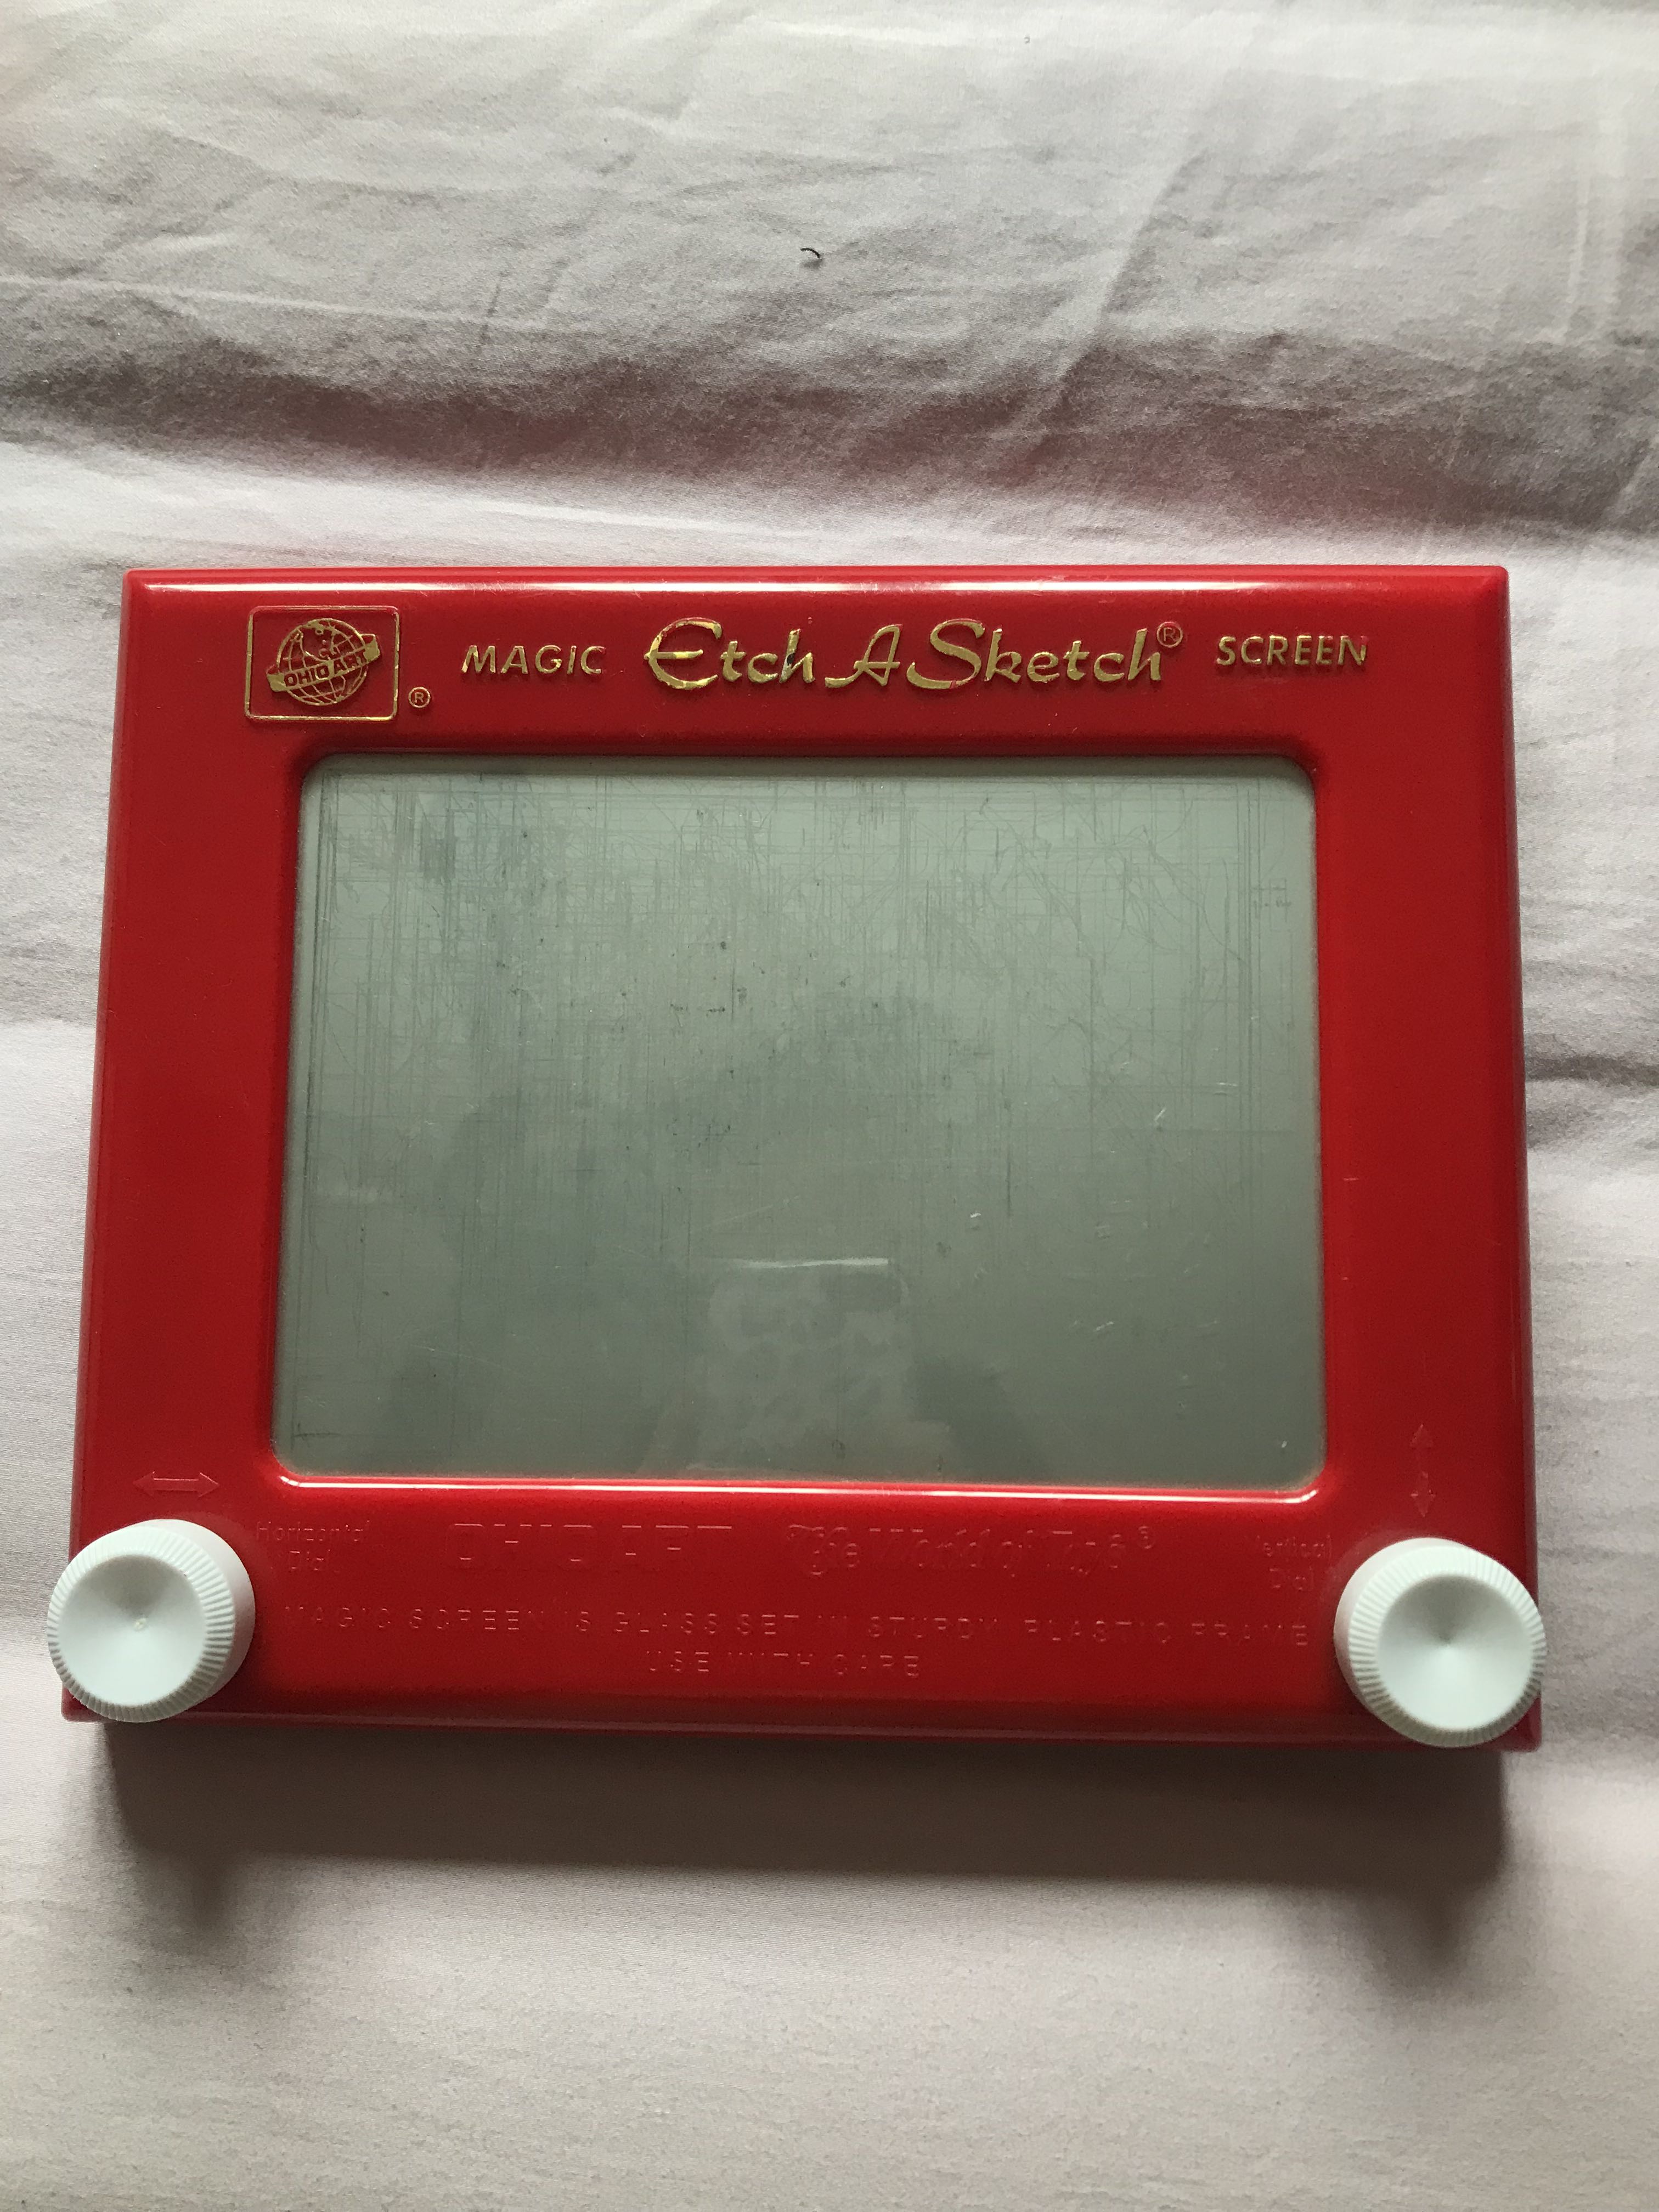 How to build Etch-A-Sketch with vanilla JavaScript, by Javitocor